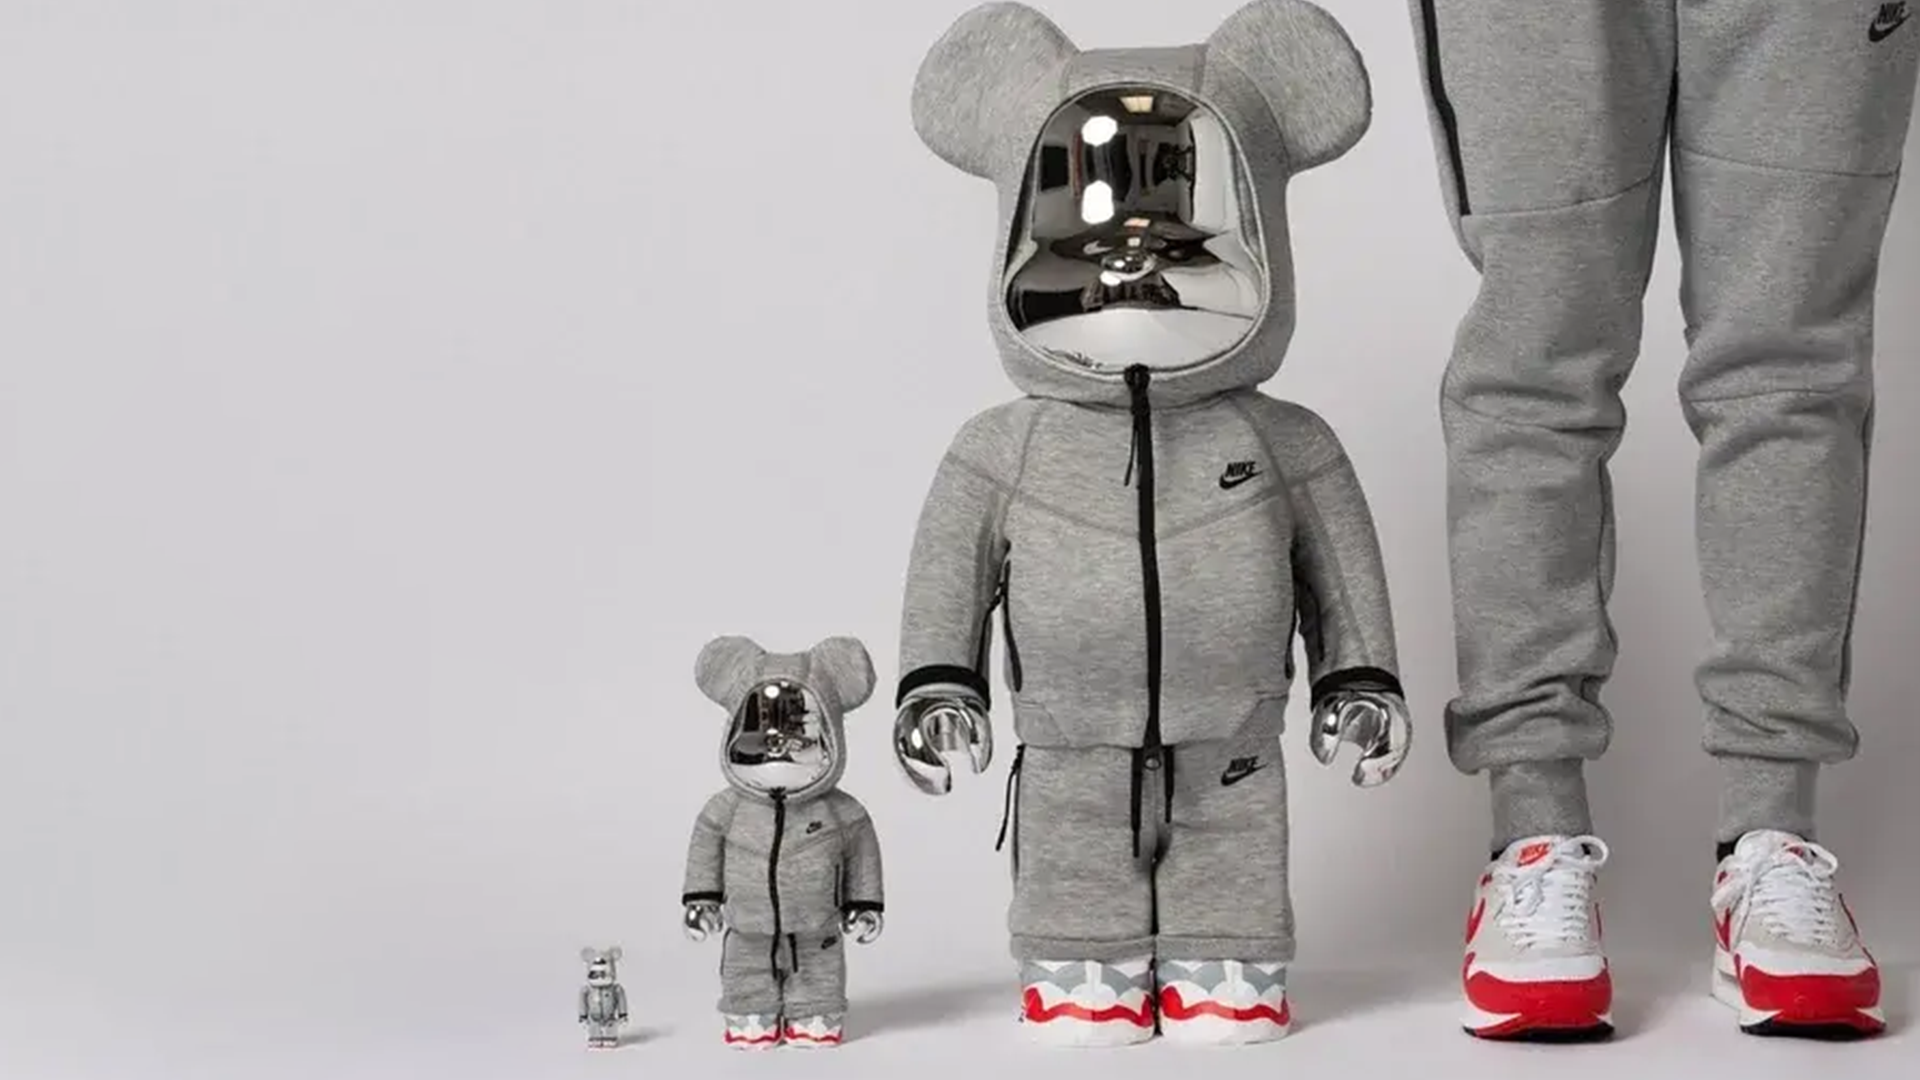 MEDICOM TOY's New BE@RBRICK Comes Wrapped In Nike Tech Fleece